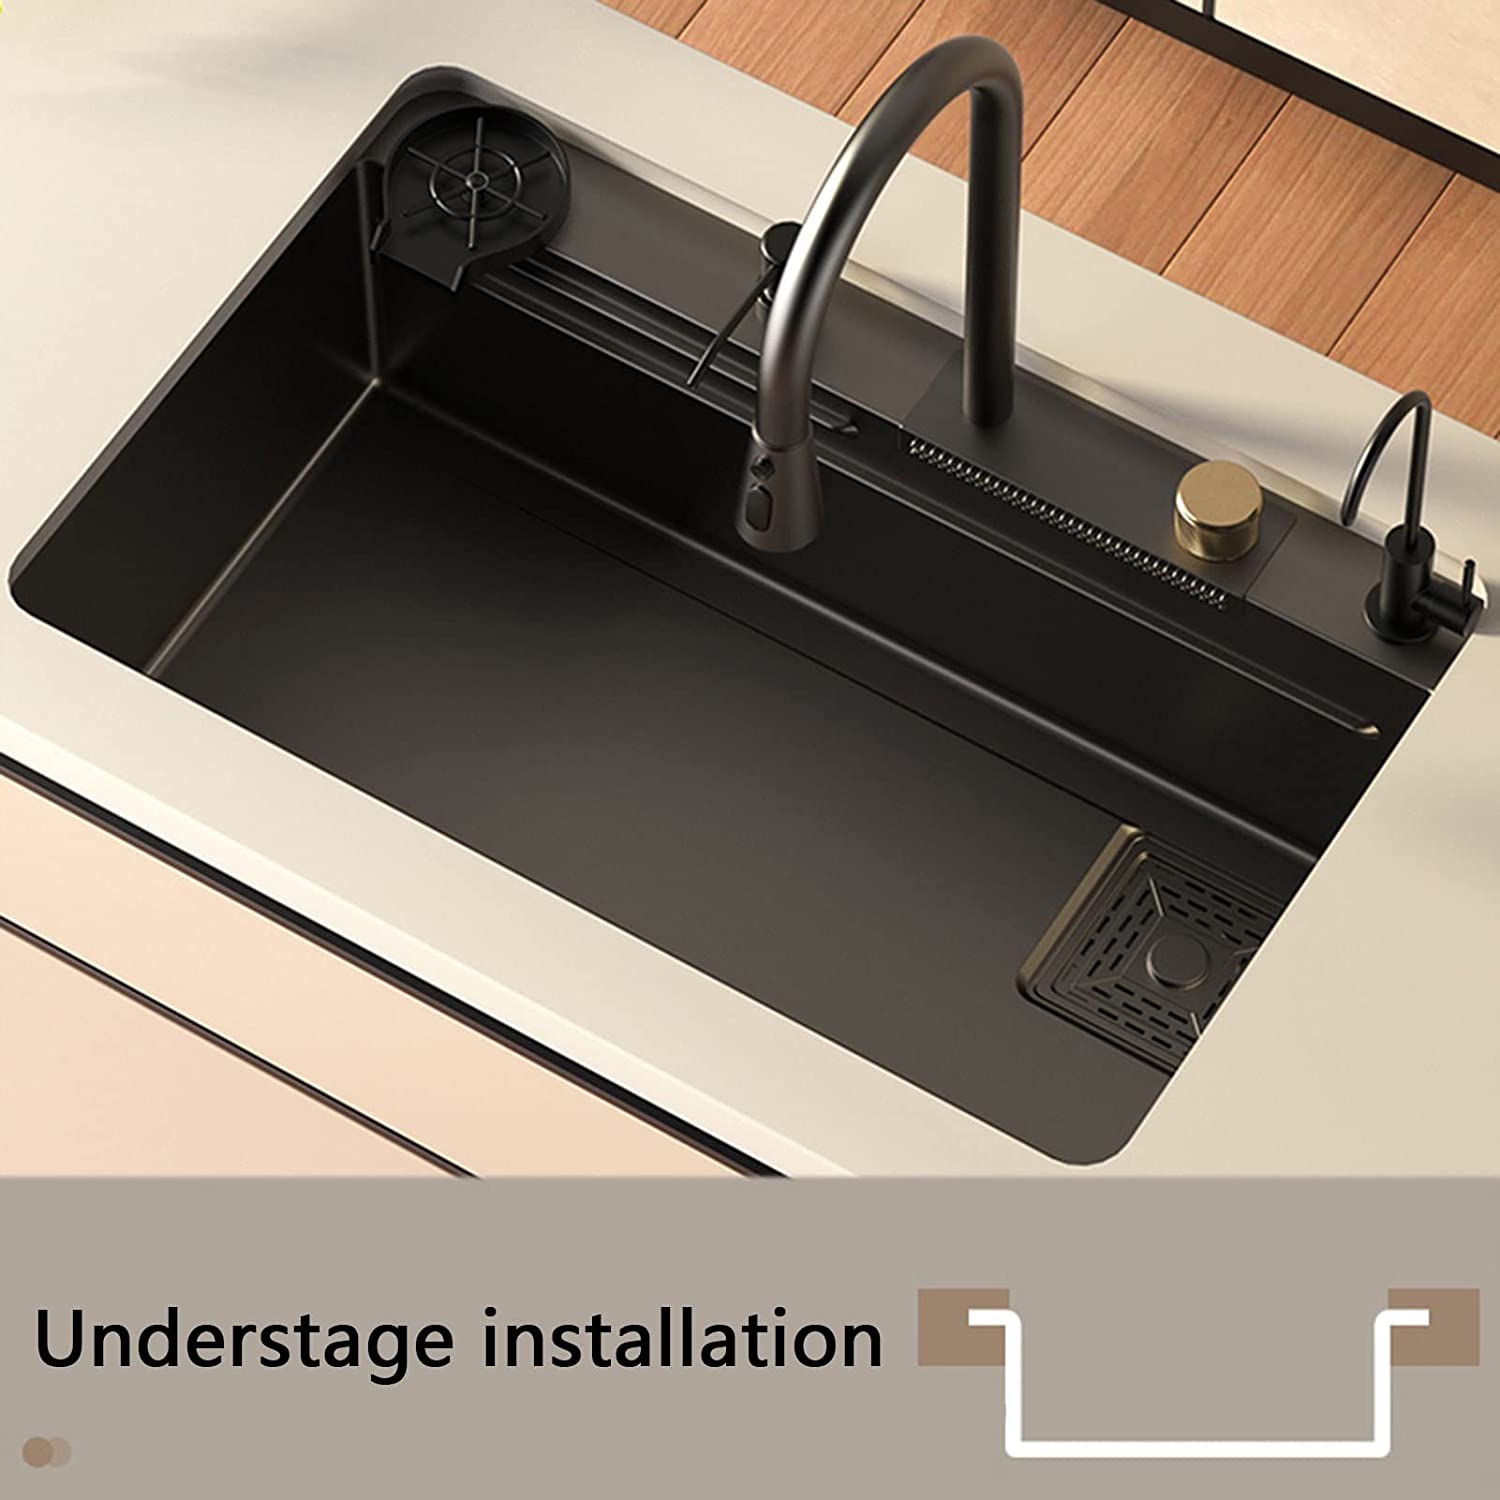 InArt Waterfall Kitchen Sink Nano Stainless Steel Single Bowl Black Color 32x18 Inches With Pull-out and Waterfall Faucet, RO tap, Cup washer, Drain Basket Handmade Multi-purpose Sink - InArt-Studio